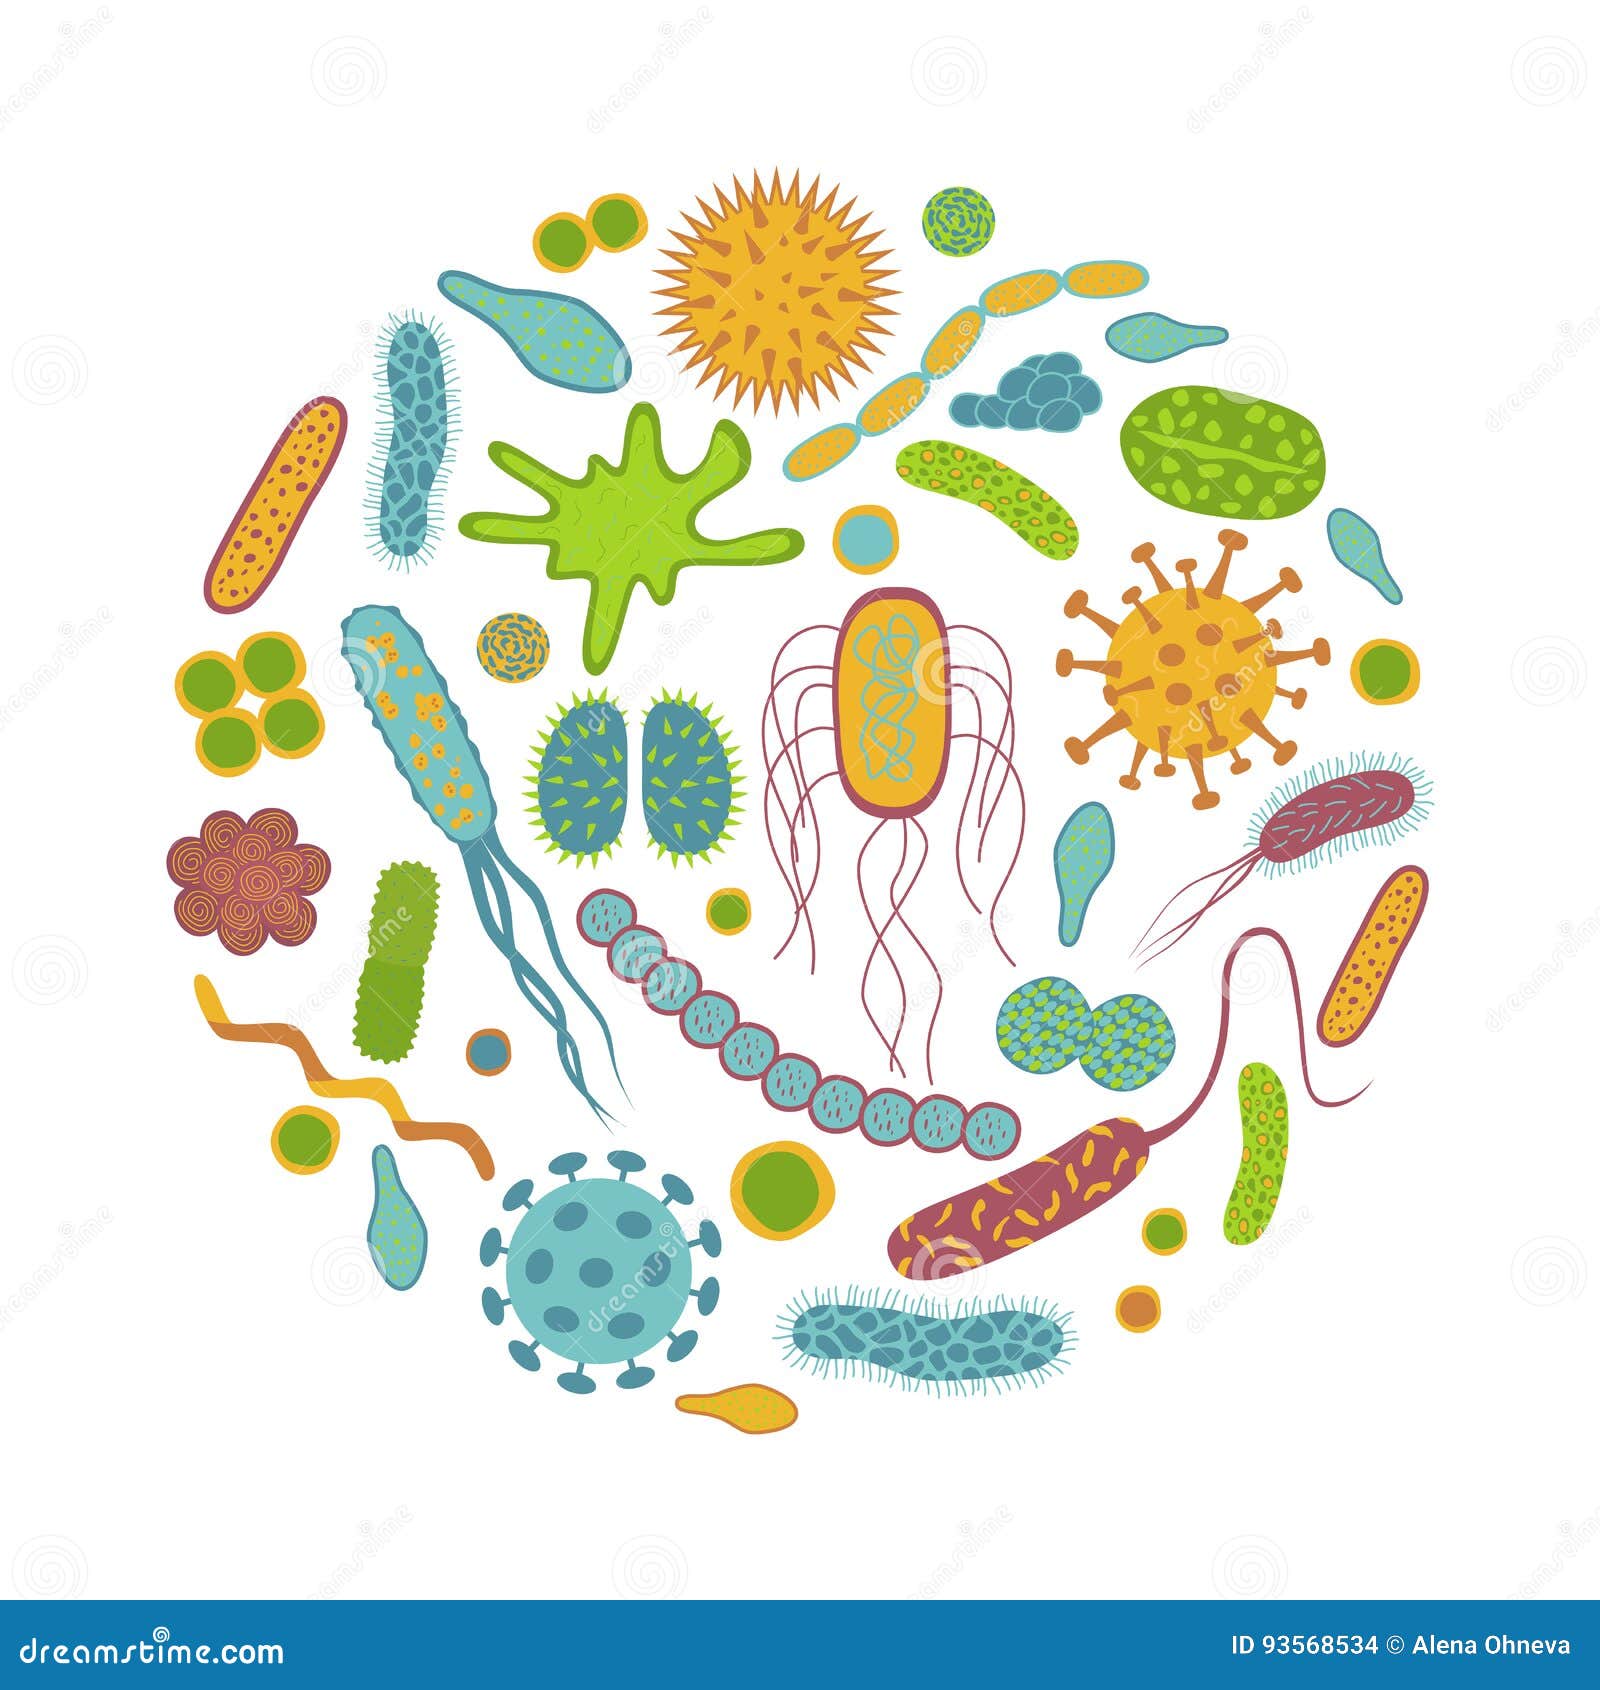 germs and bacteria icons  on white background.